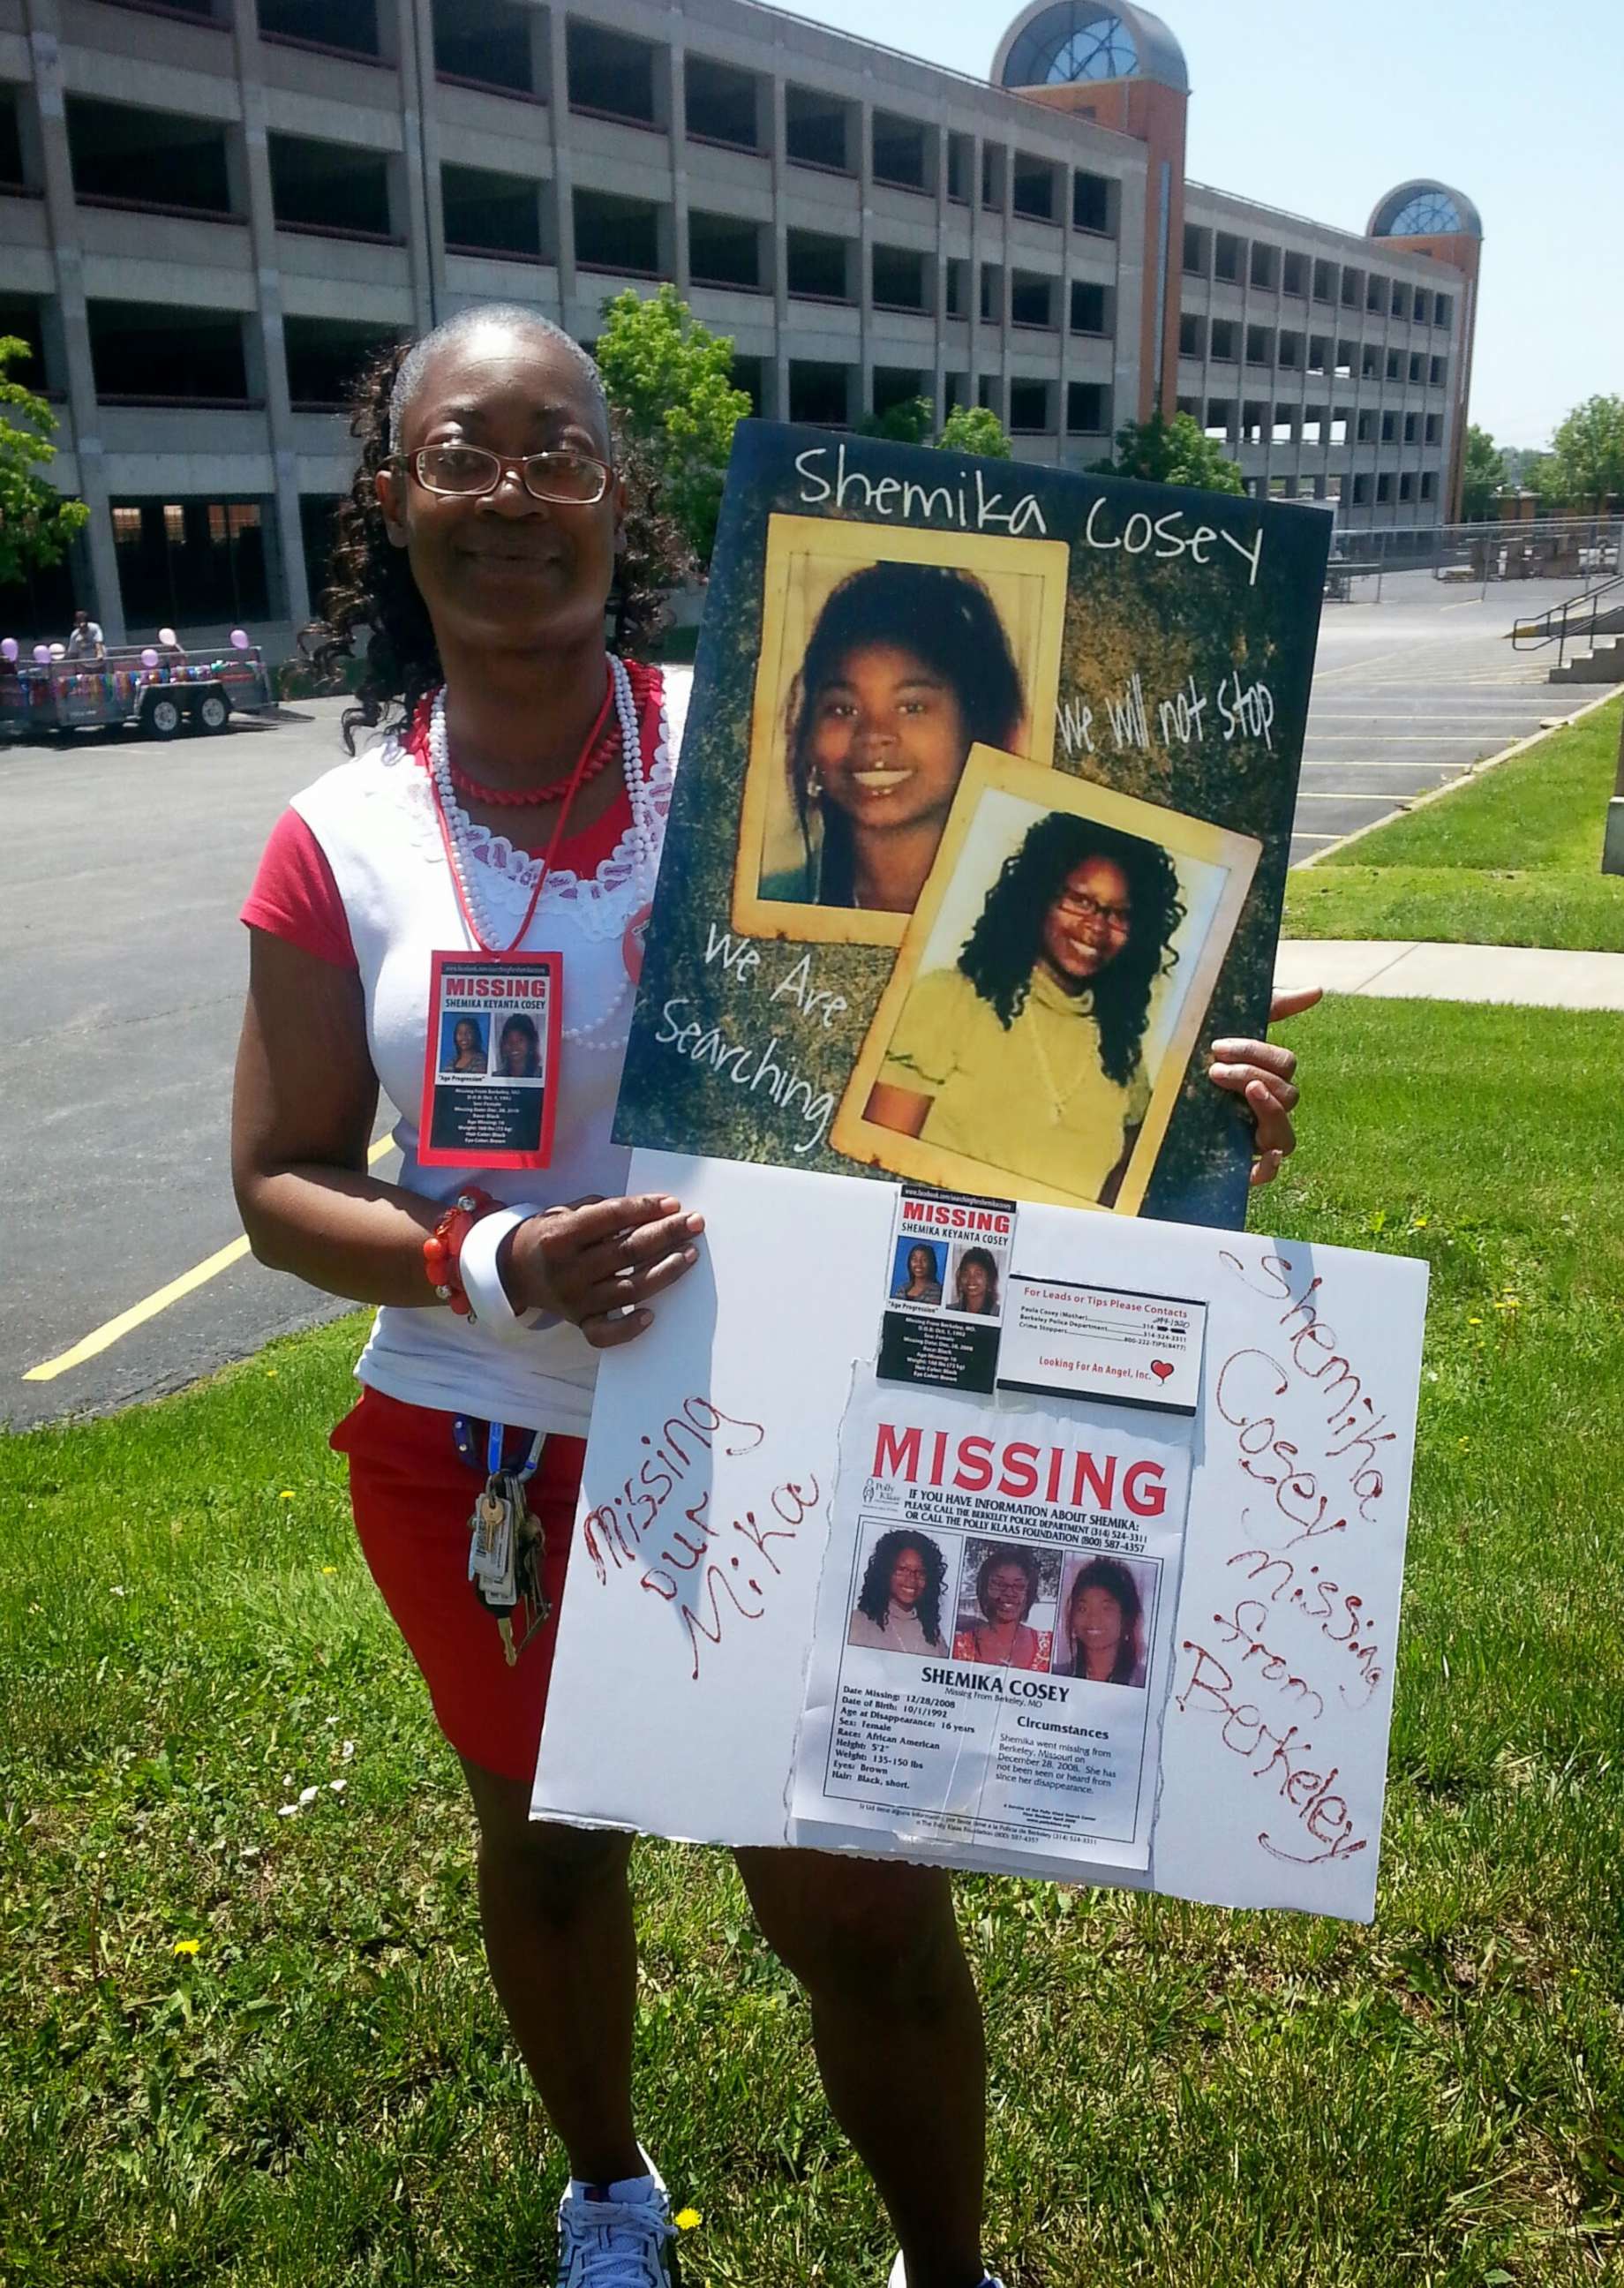 PHOTO: Paula Hill is still searching for her daughter, Shemika Cosey, who went missing in 2008. 
